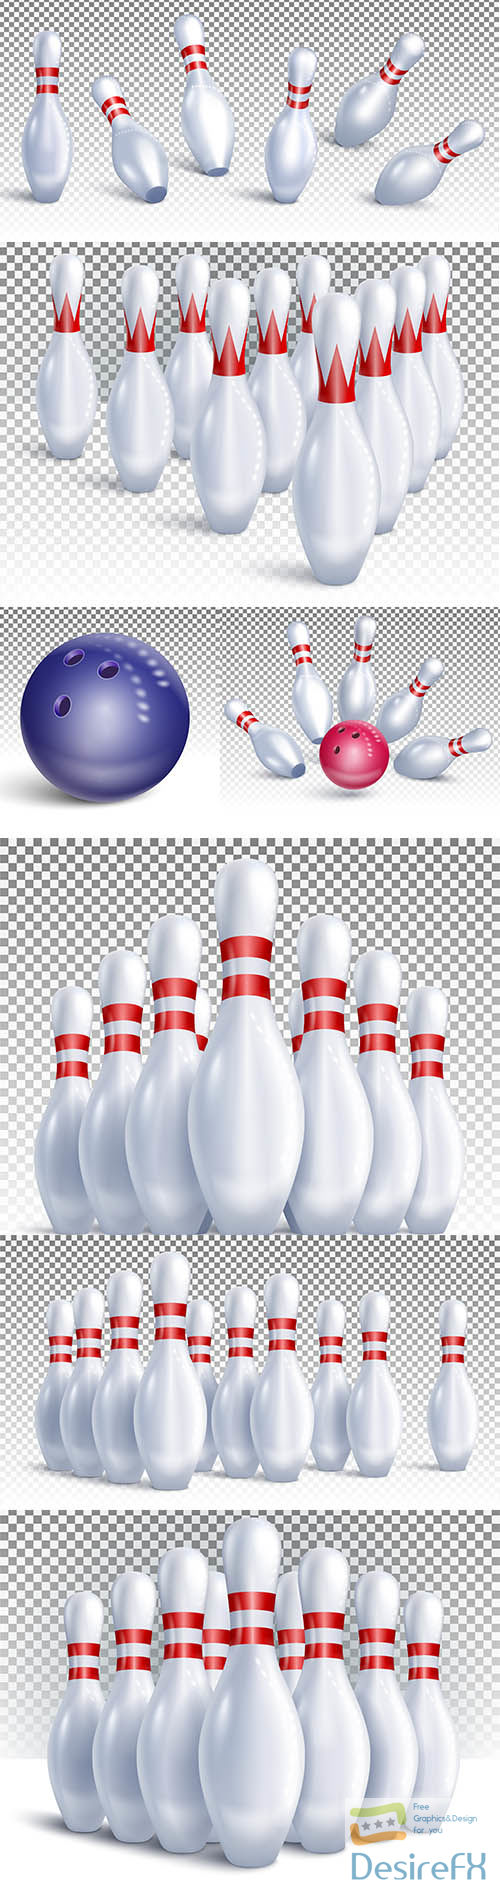 Bowling pins arranged for game and tournament front view